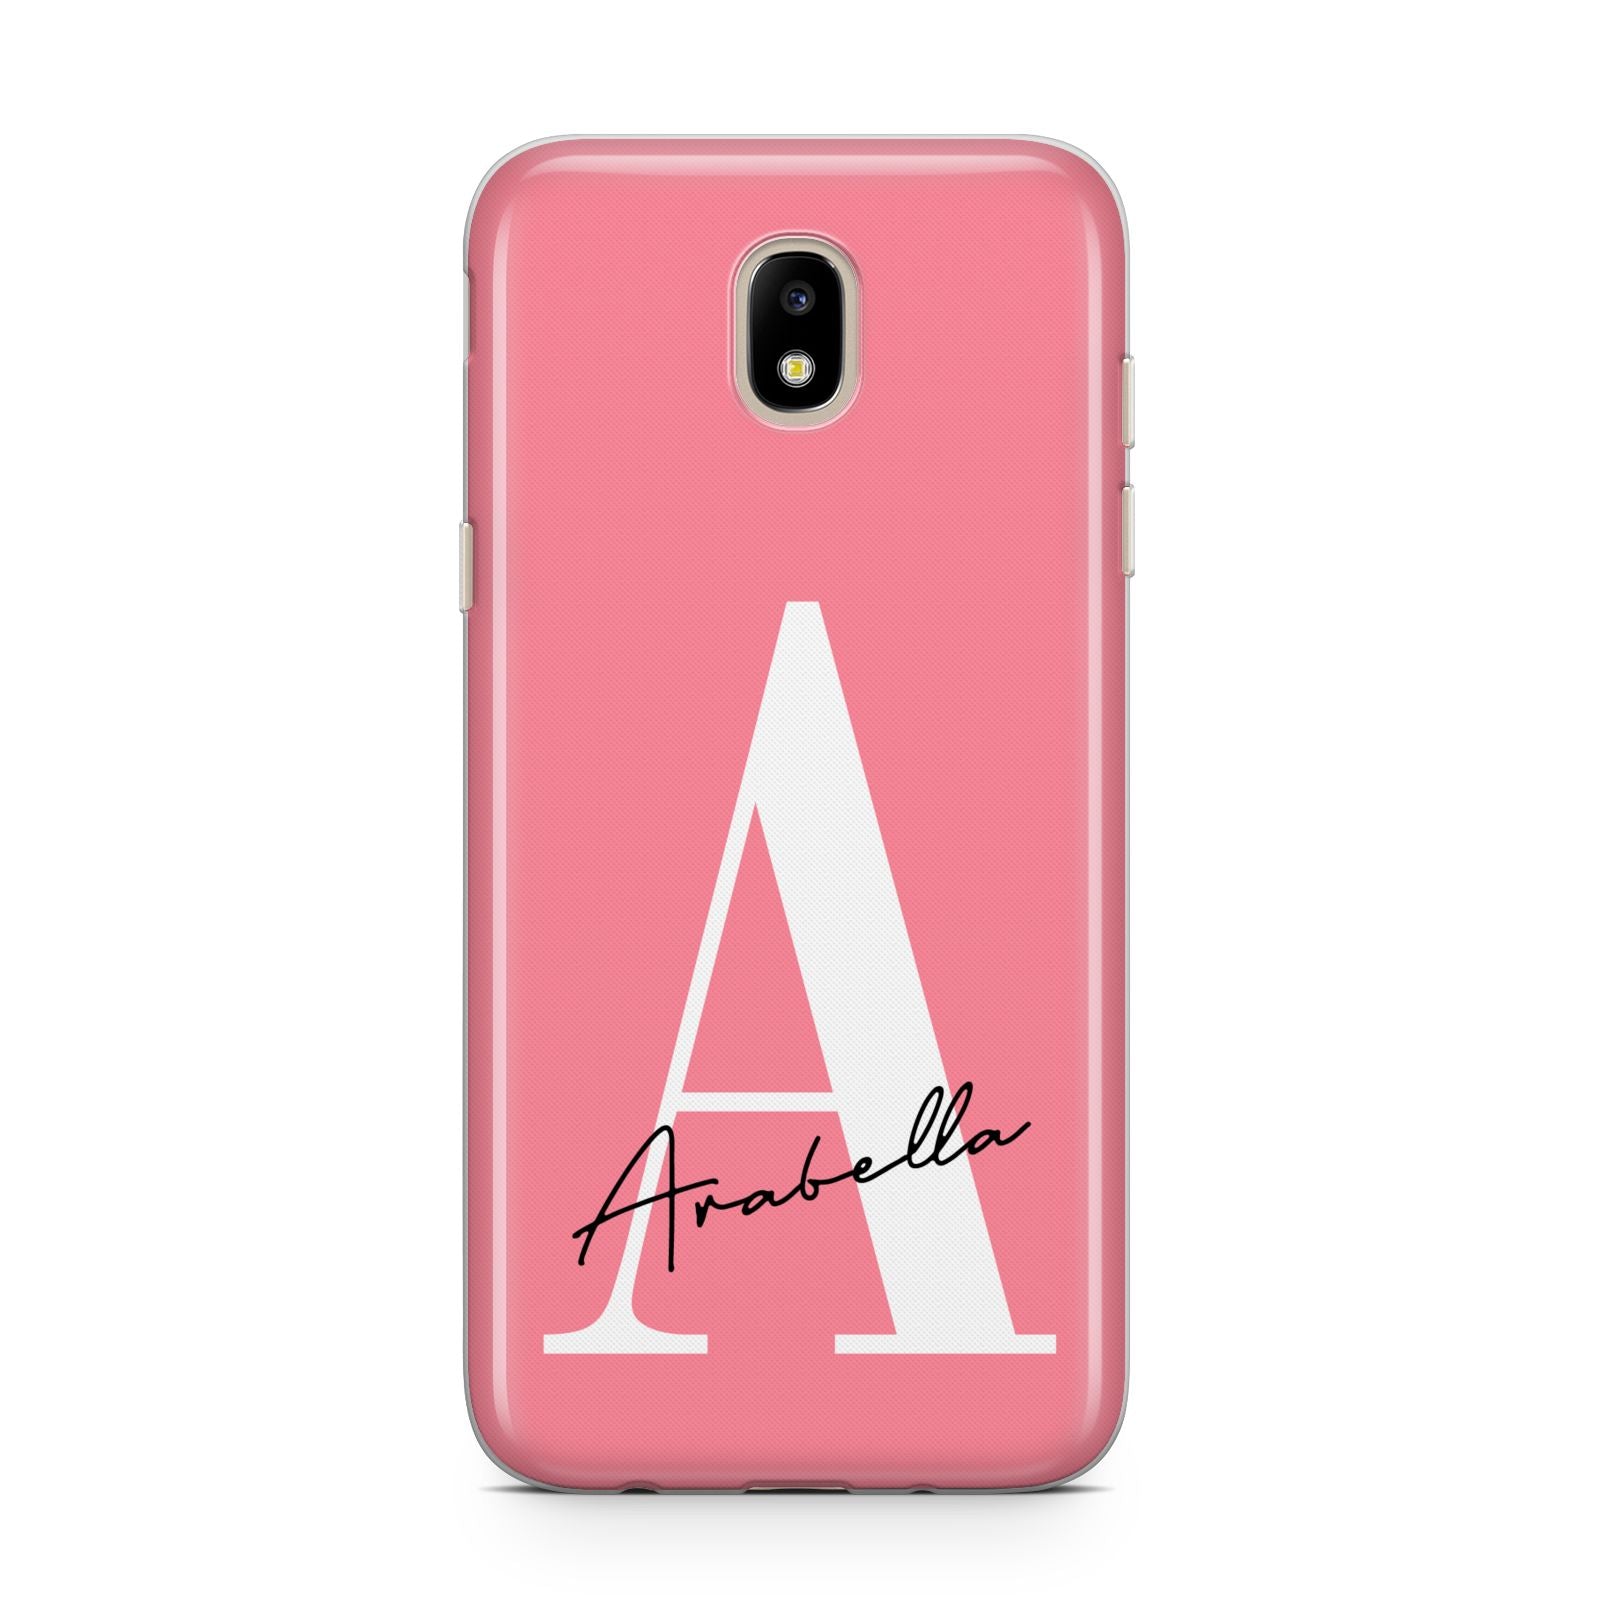 Personalised Pink White Initial Samsung J5 2017 Case